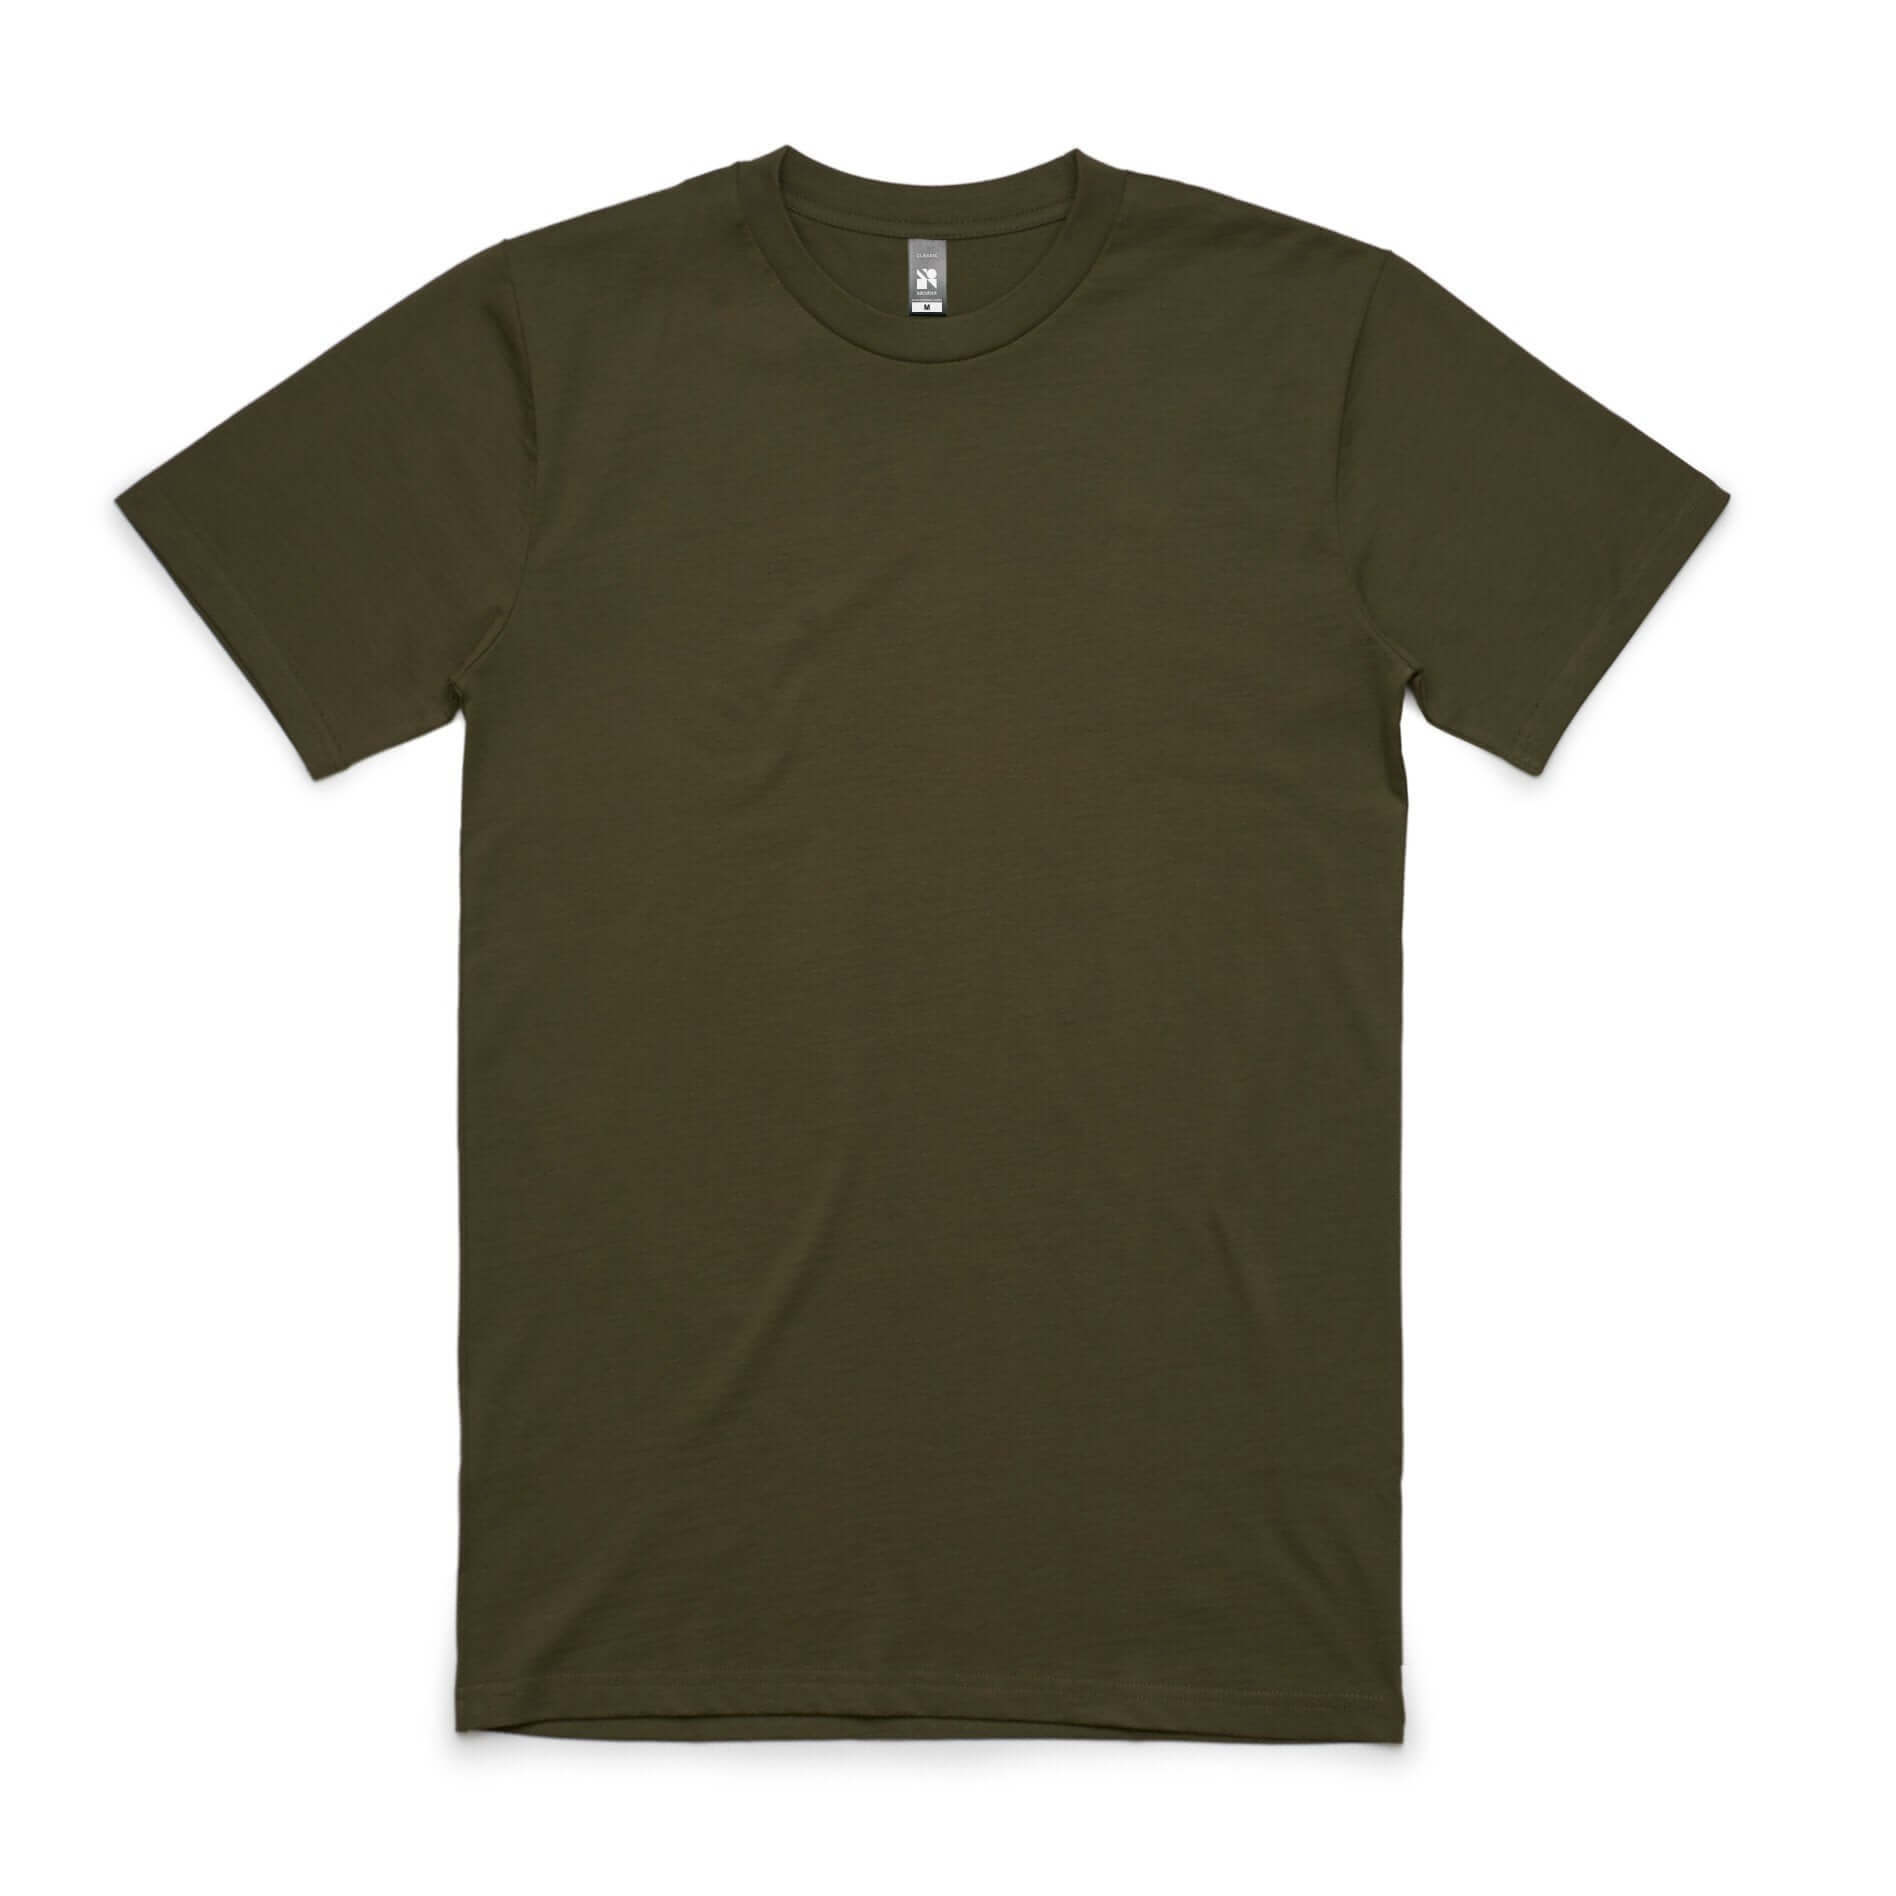 AS Colour CLASSIC TEE - Army